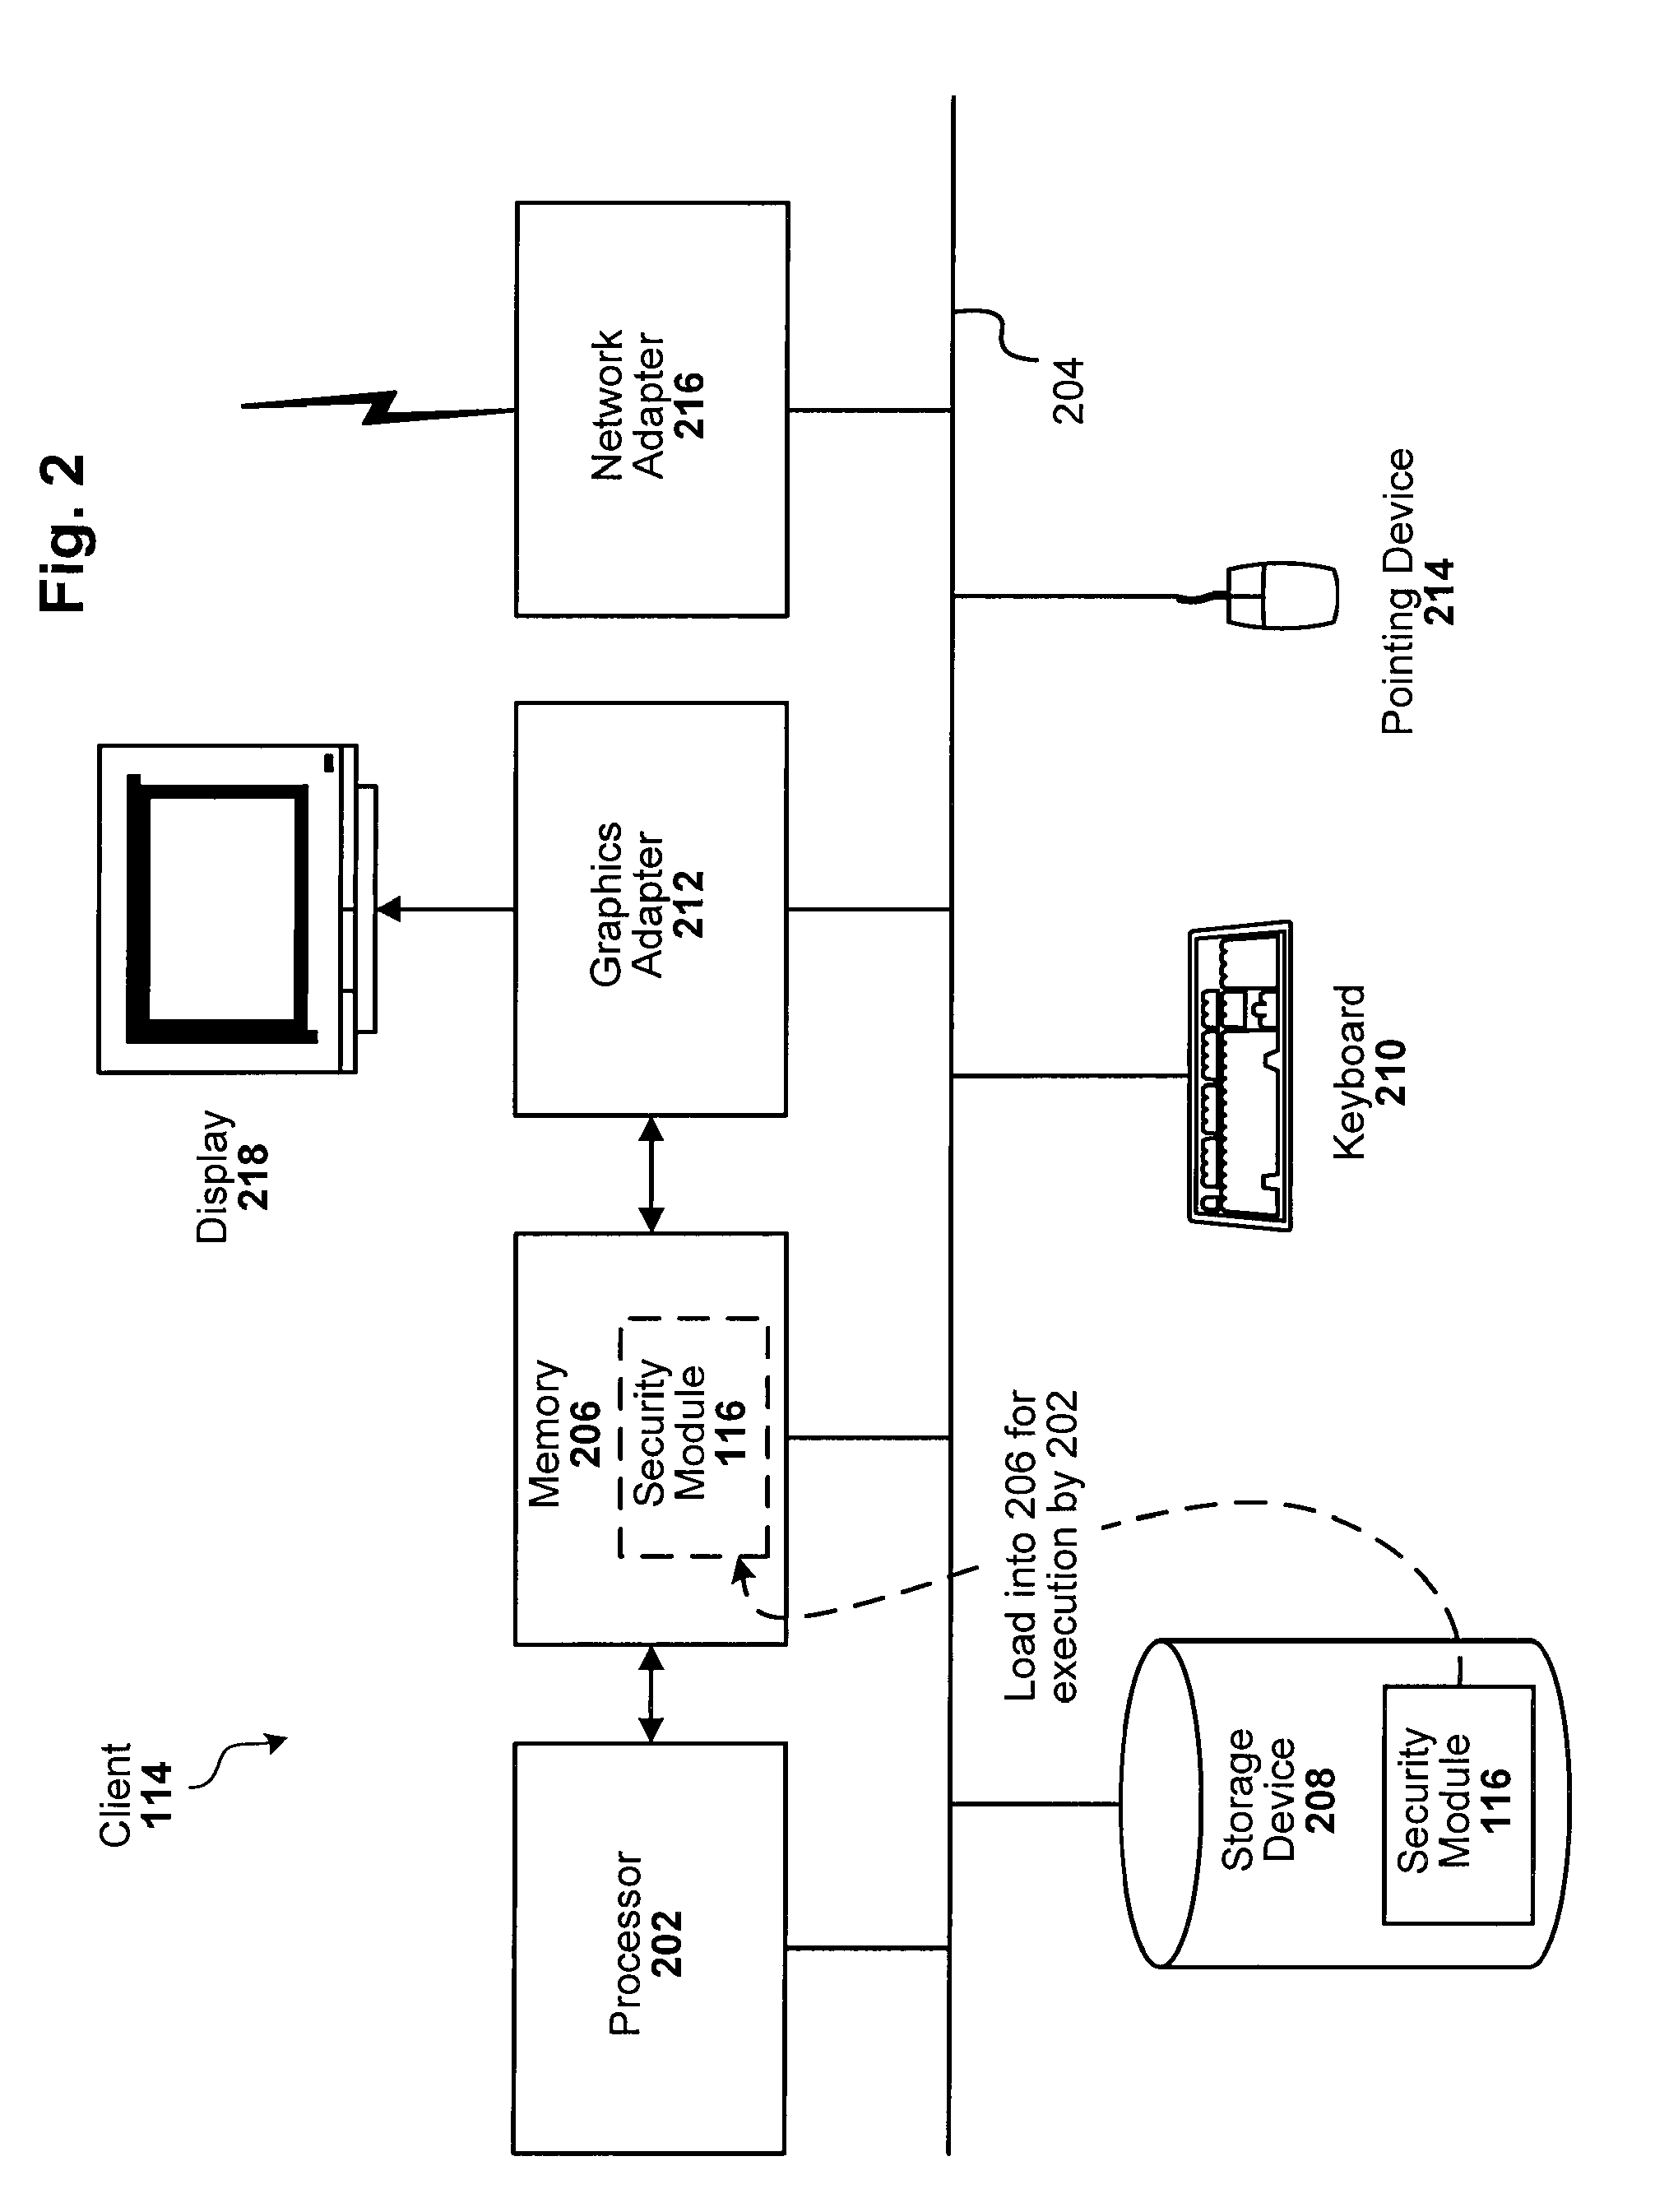 Extrusion detection of obfuscated content